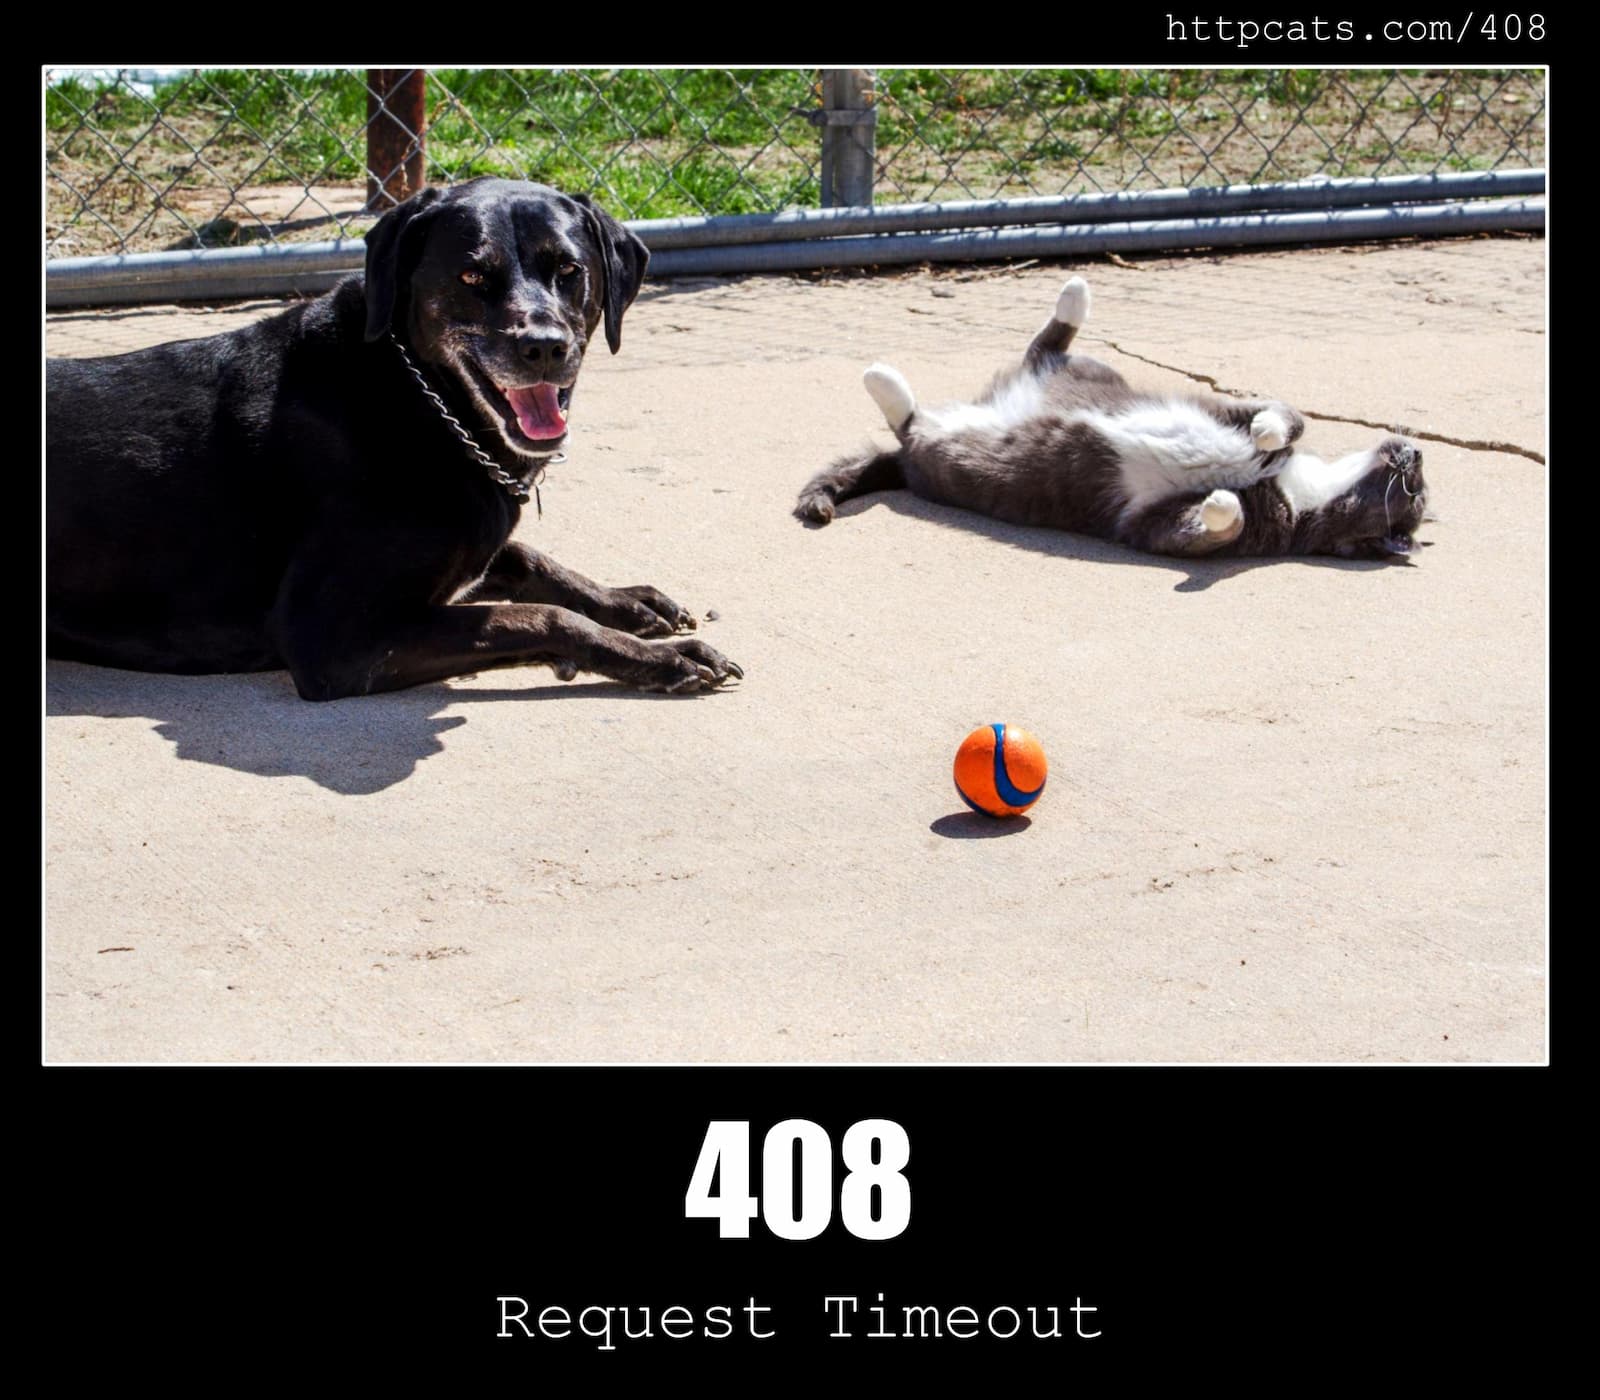 HTTP Status Code 408 Request Timeout & Cats